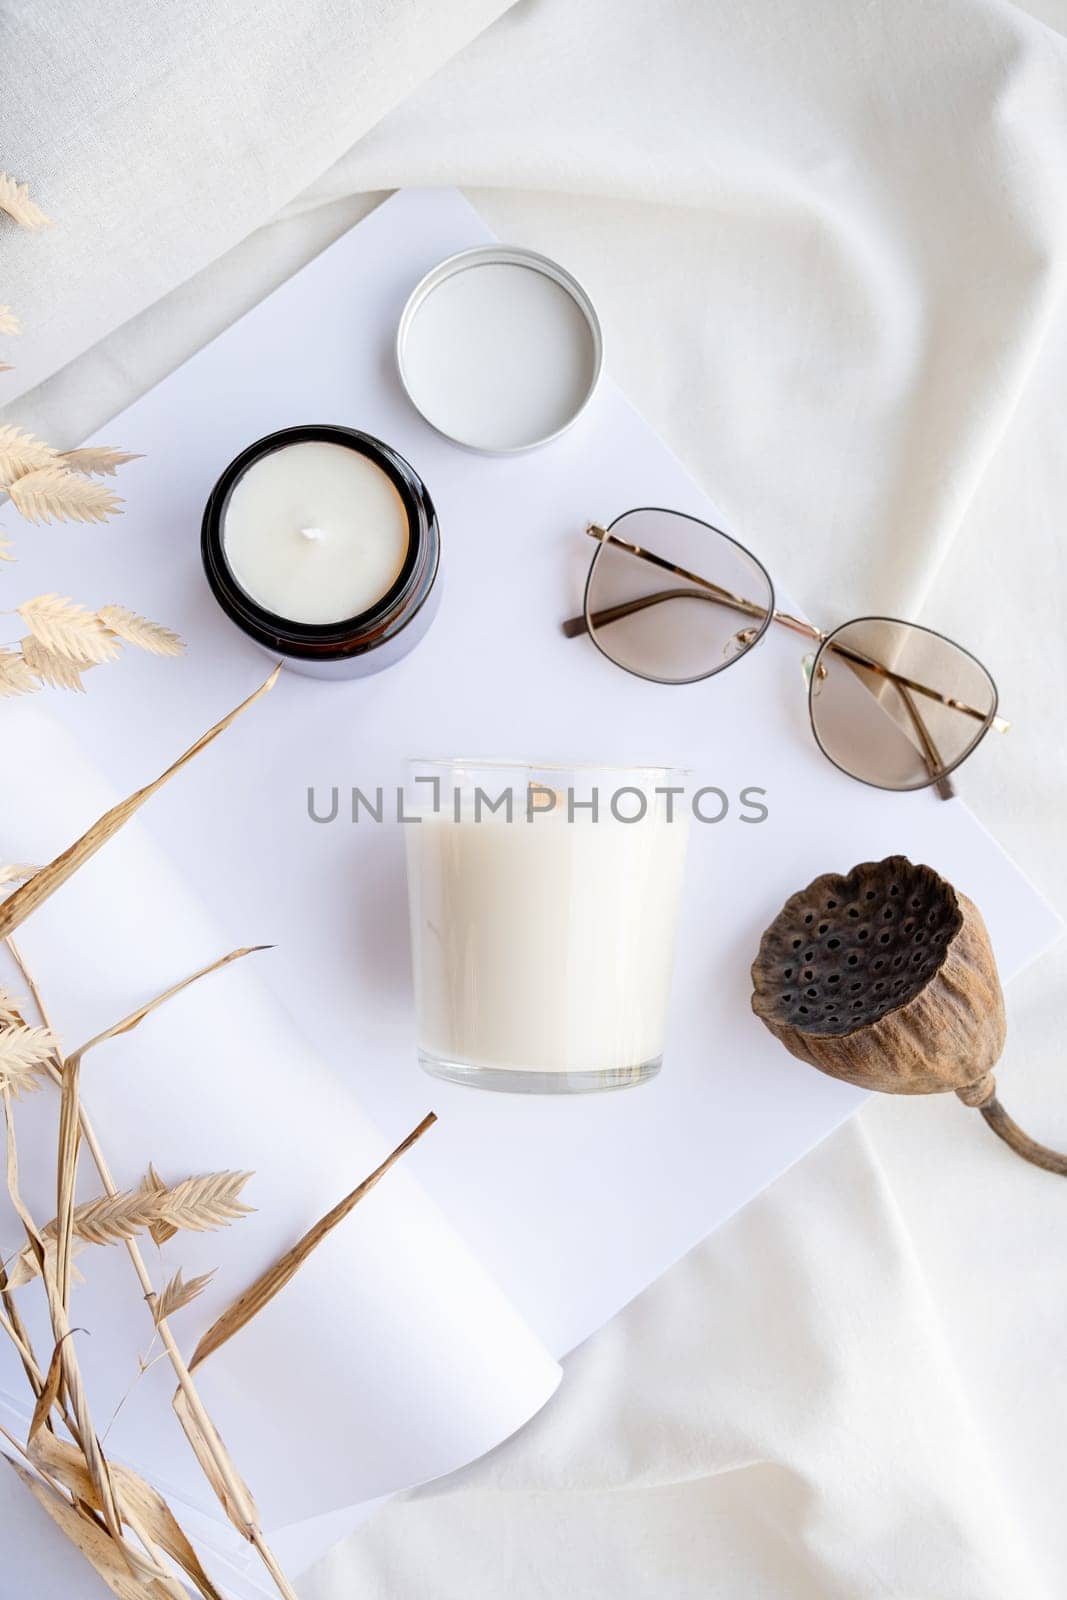 Soy wax aroma candles in brown jar on bed , with fashion glasses. Candle mockup design. Mockup soy wax candle in natural style.